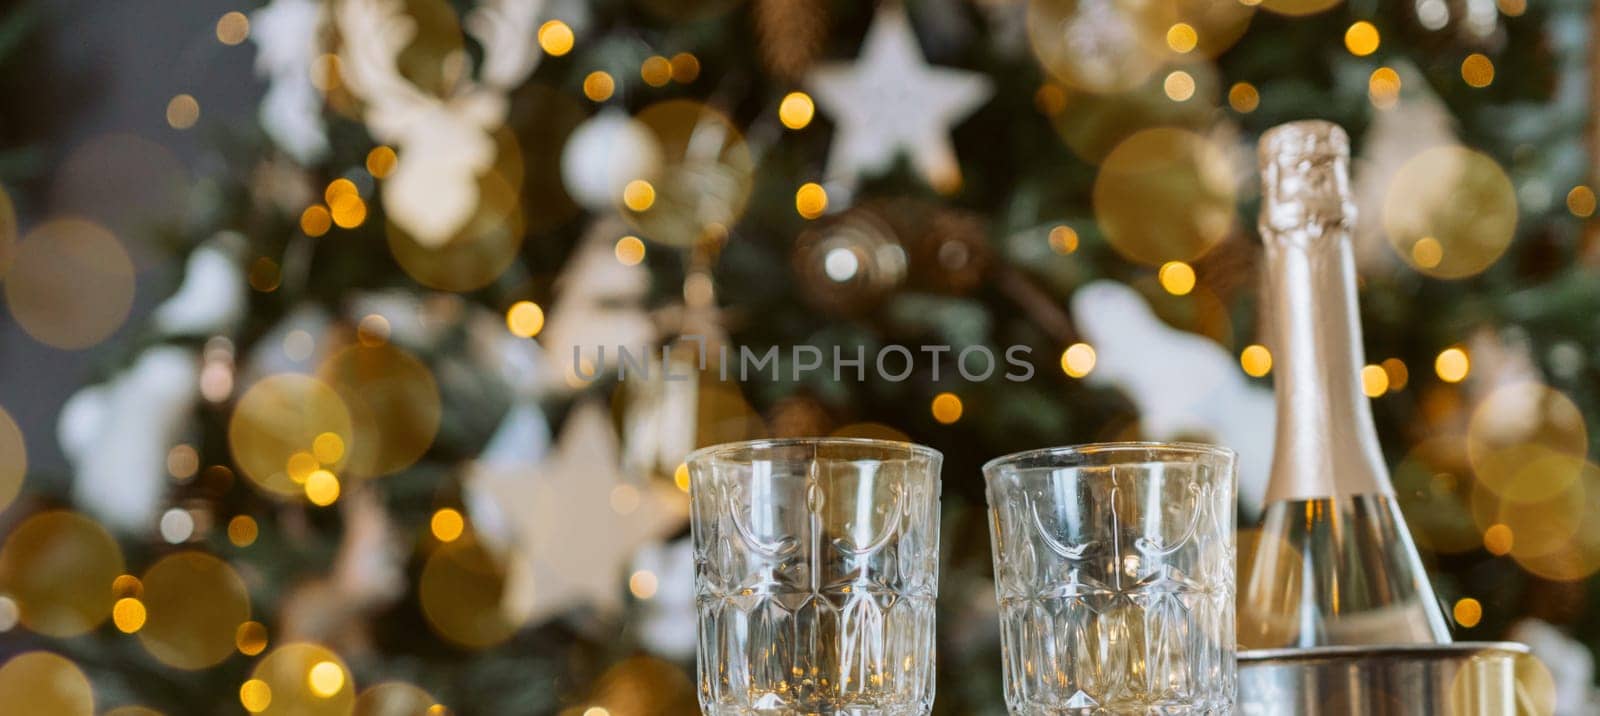 Champagne glasses, New Year decor. New Year's festive setting, family holidays.Two glasses of champagne are on the table against the background of New Year's decorated tree. by Matiunina